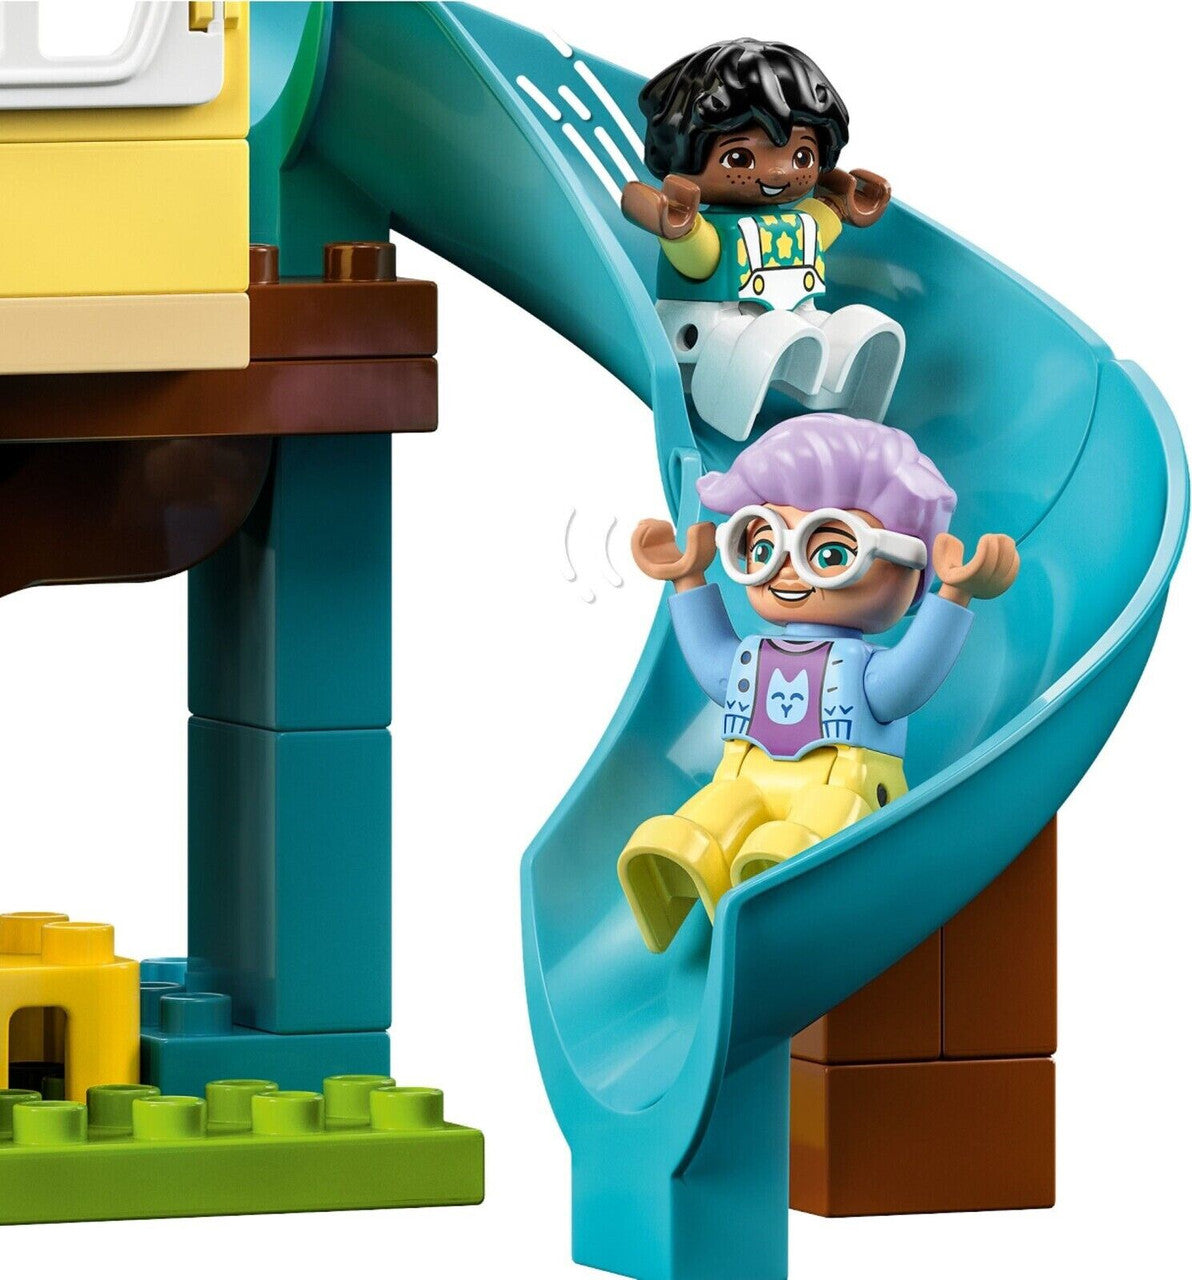 LEGO DUPLO 3in1 Tree House 10993